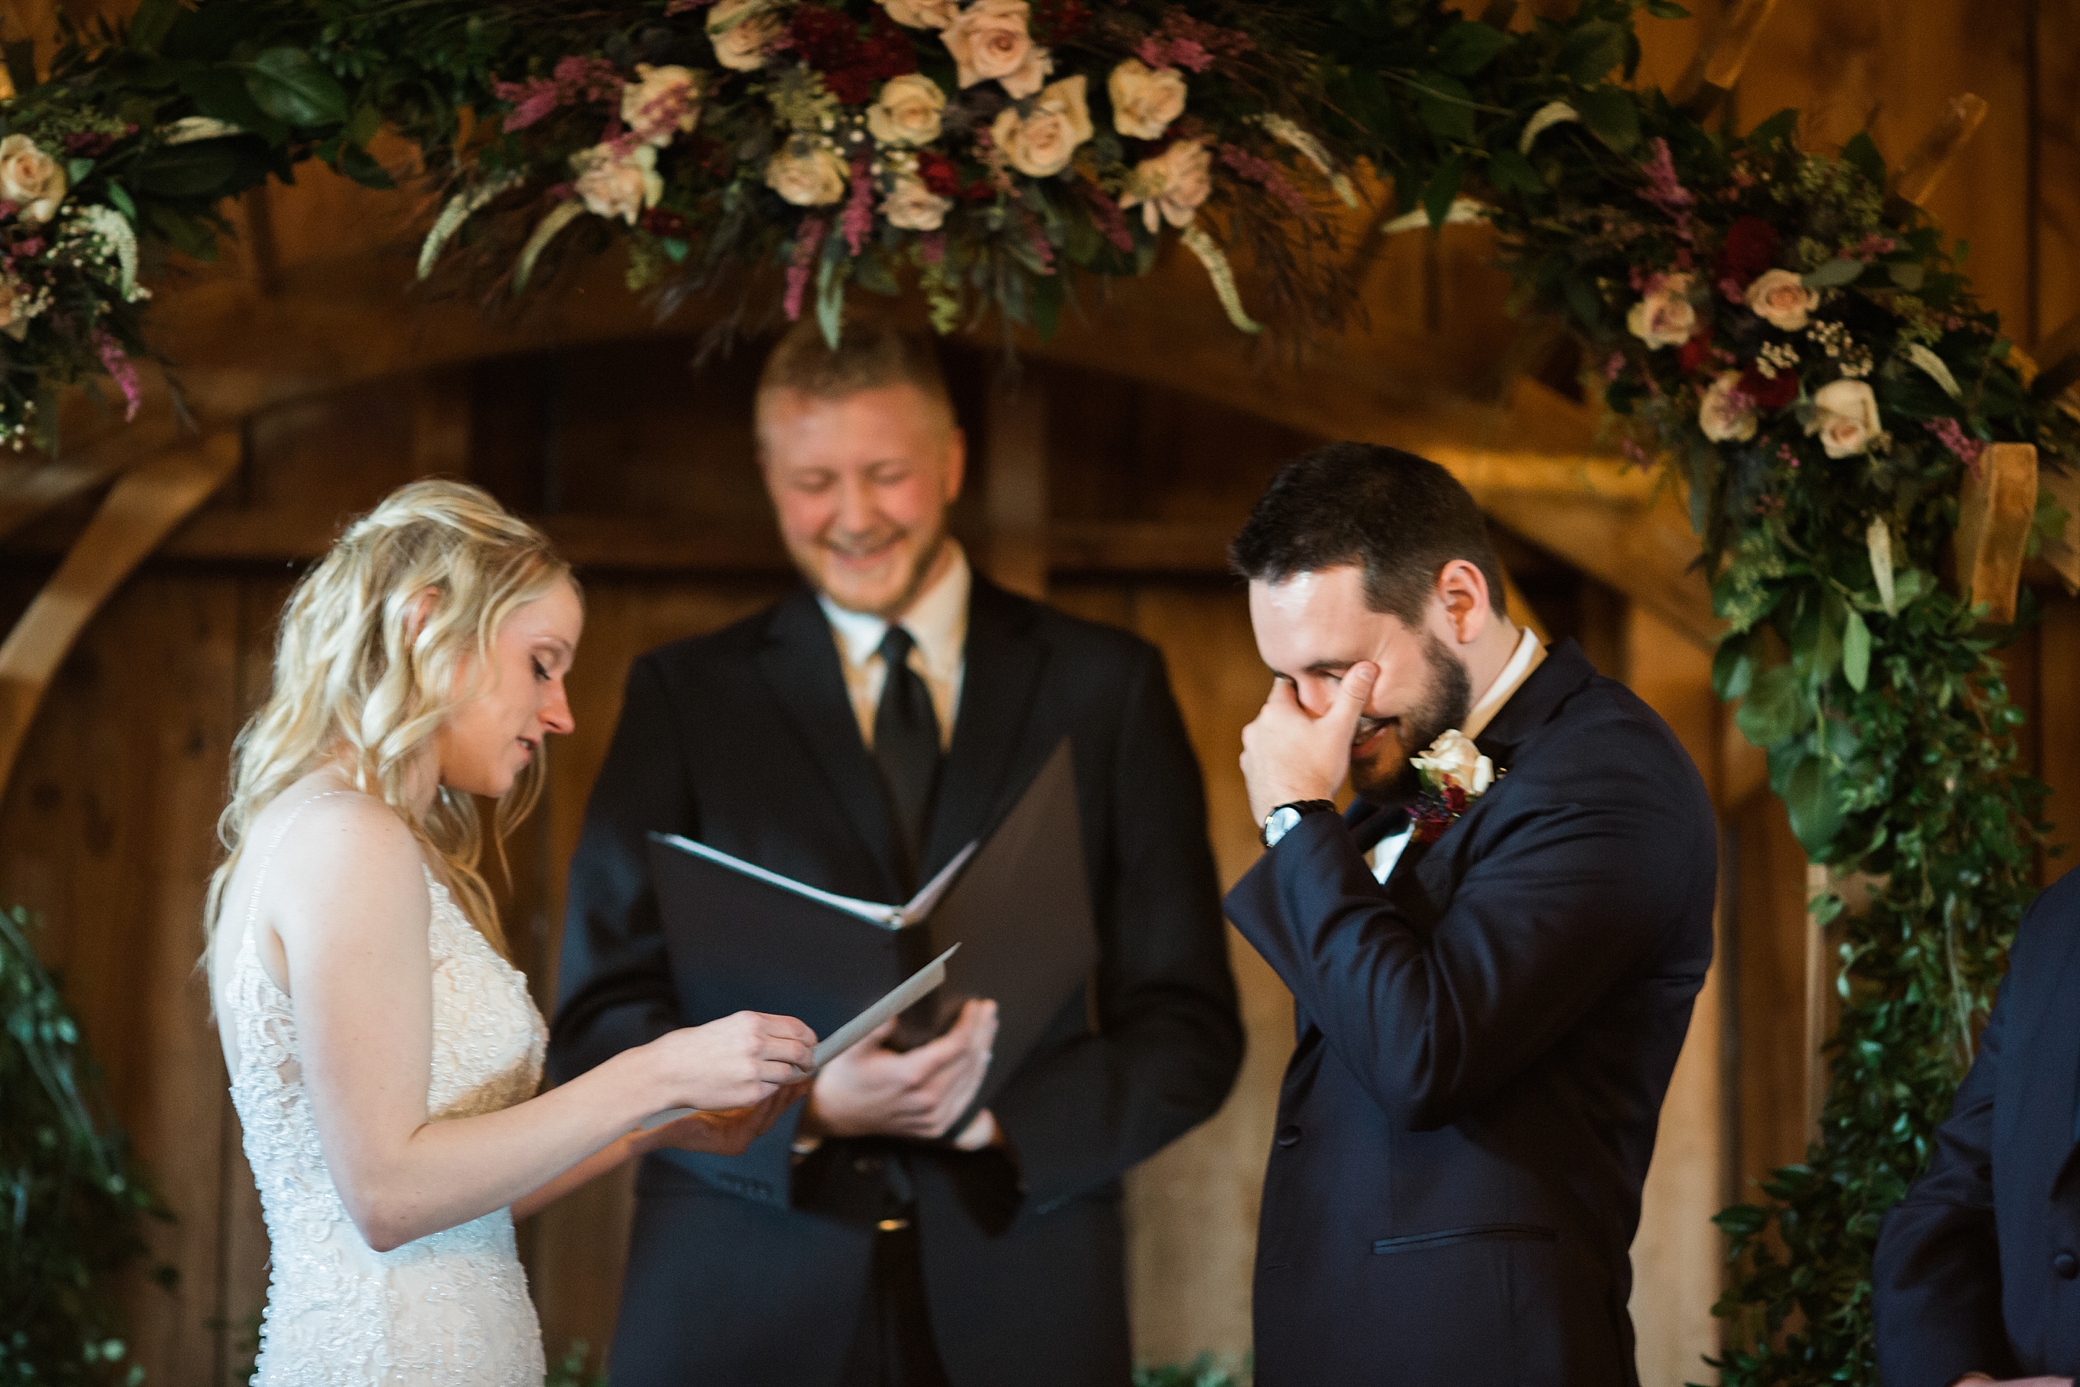 Groom crying during vows | Megan Montalvo Photography 